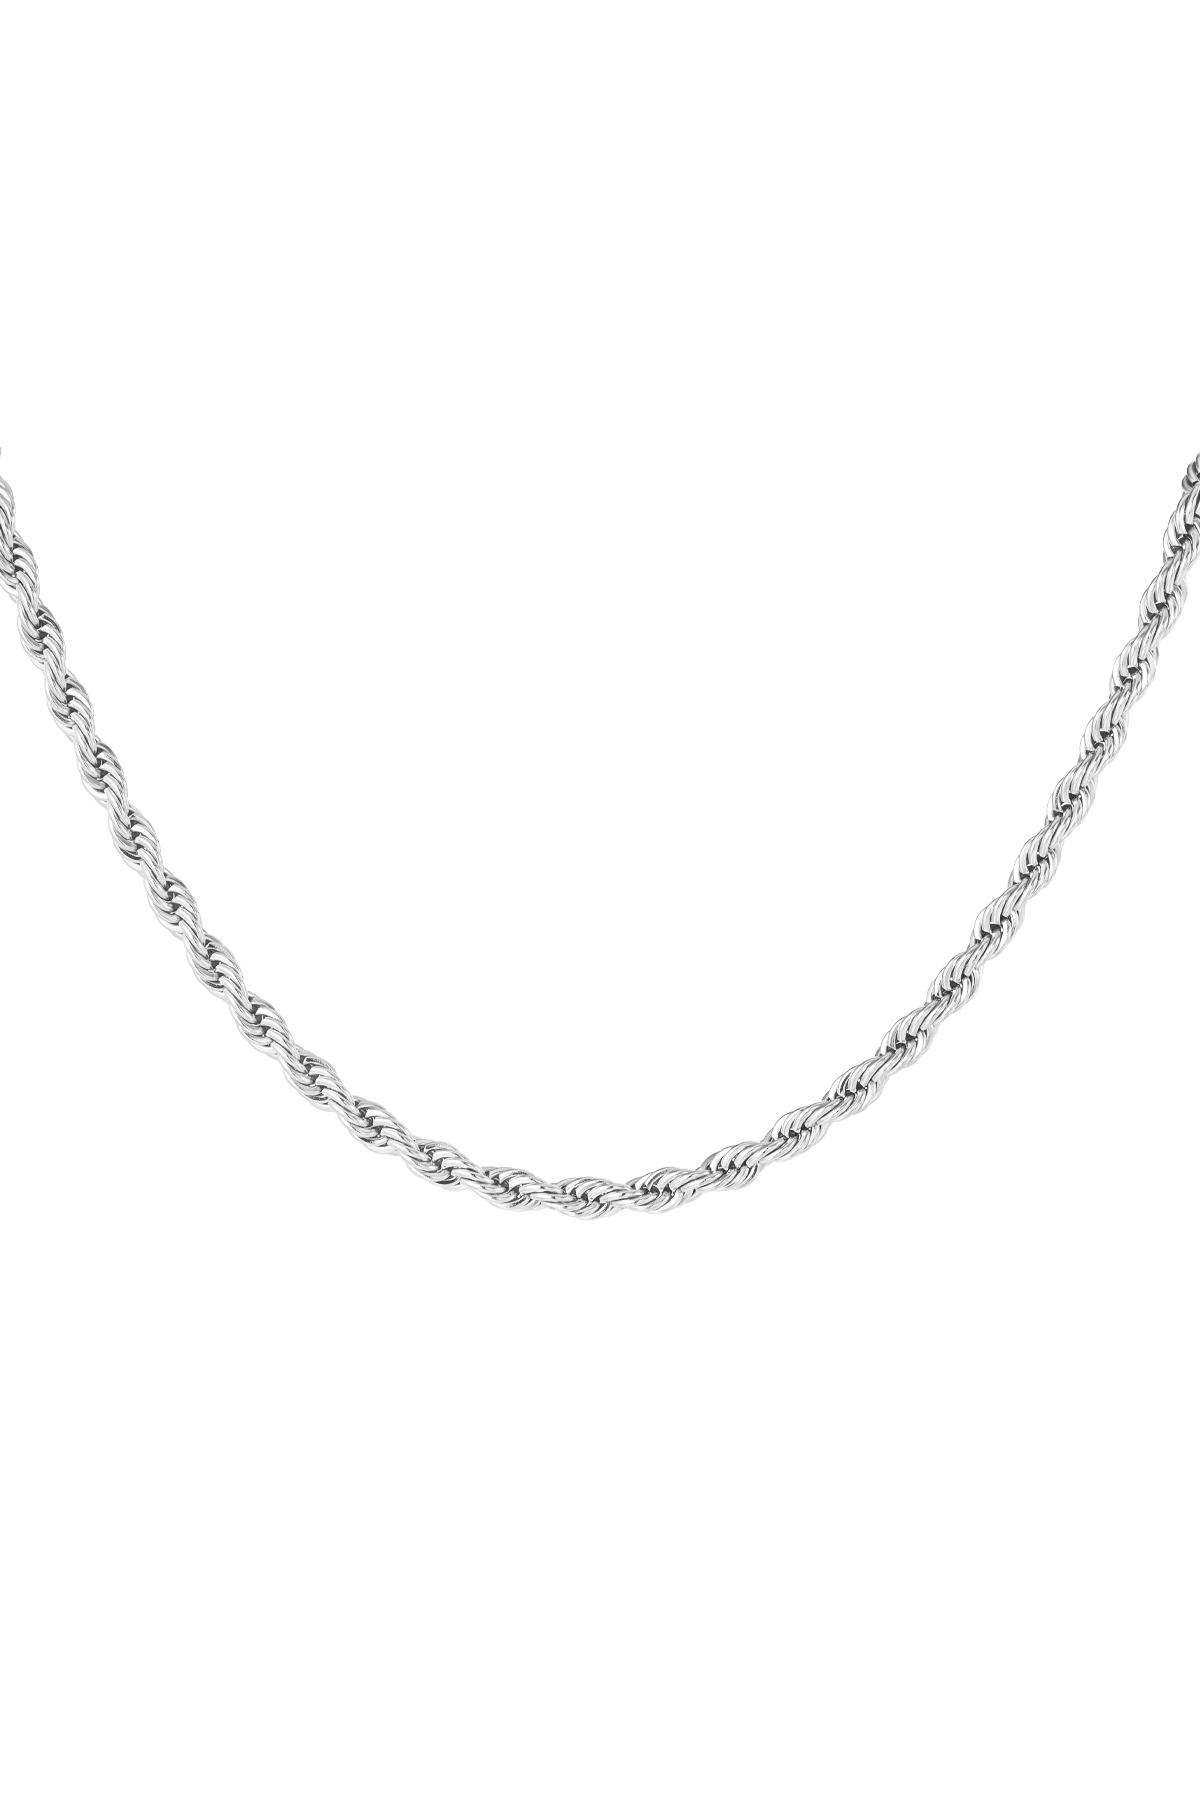 Necklace twisted short - silver-4.5MM